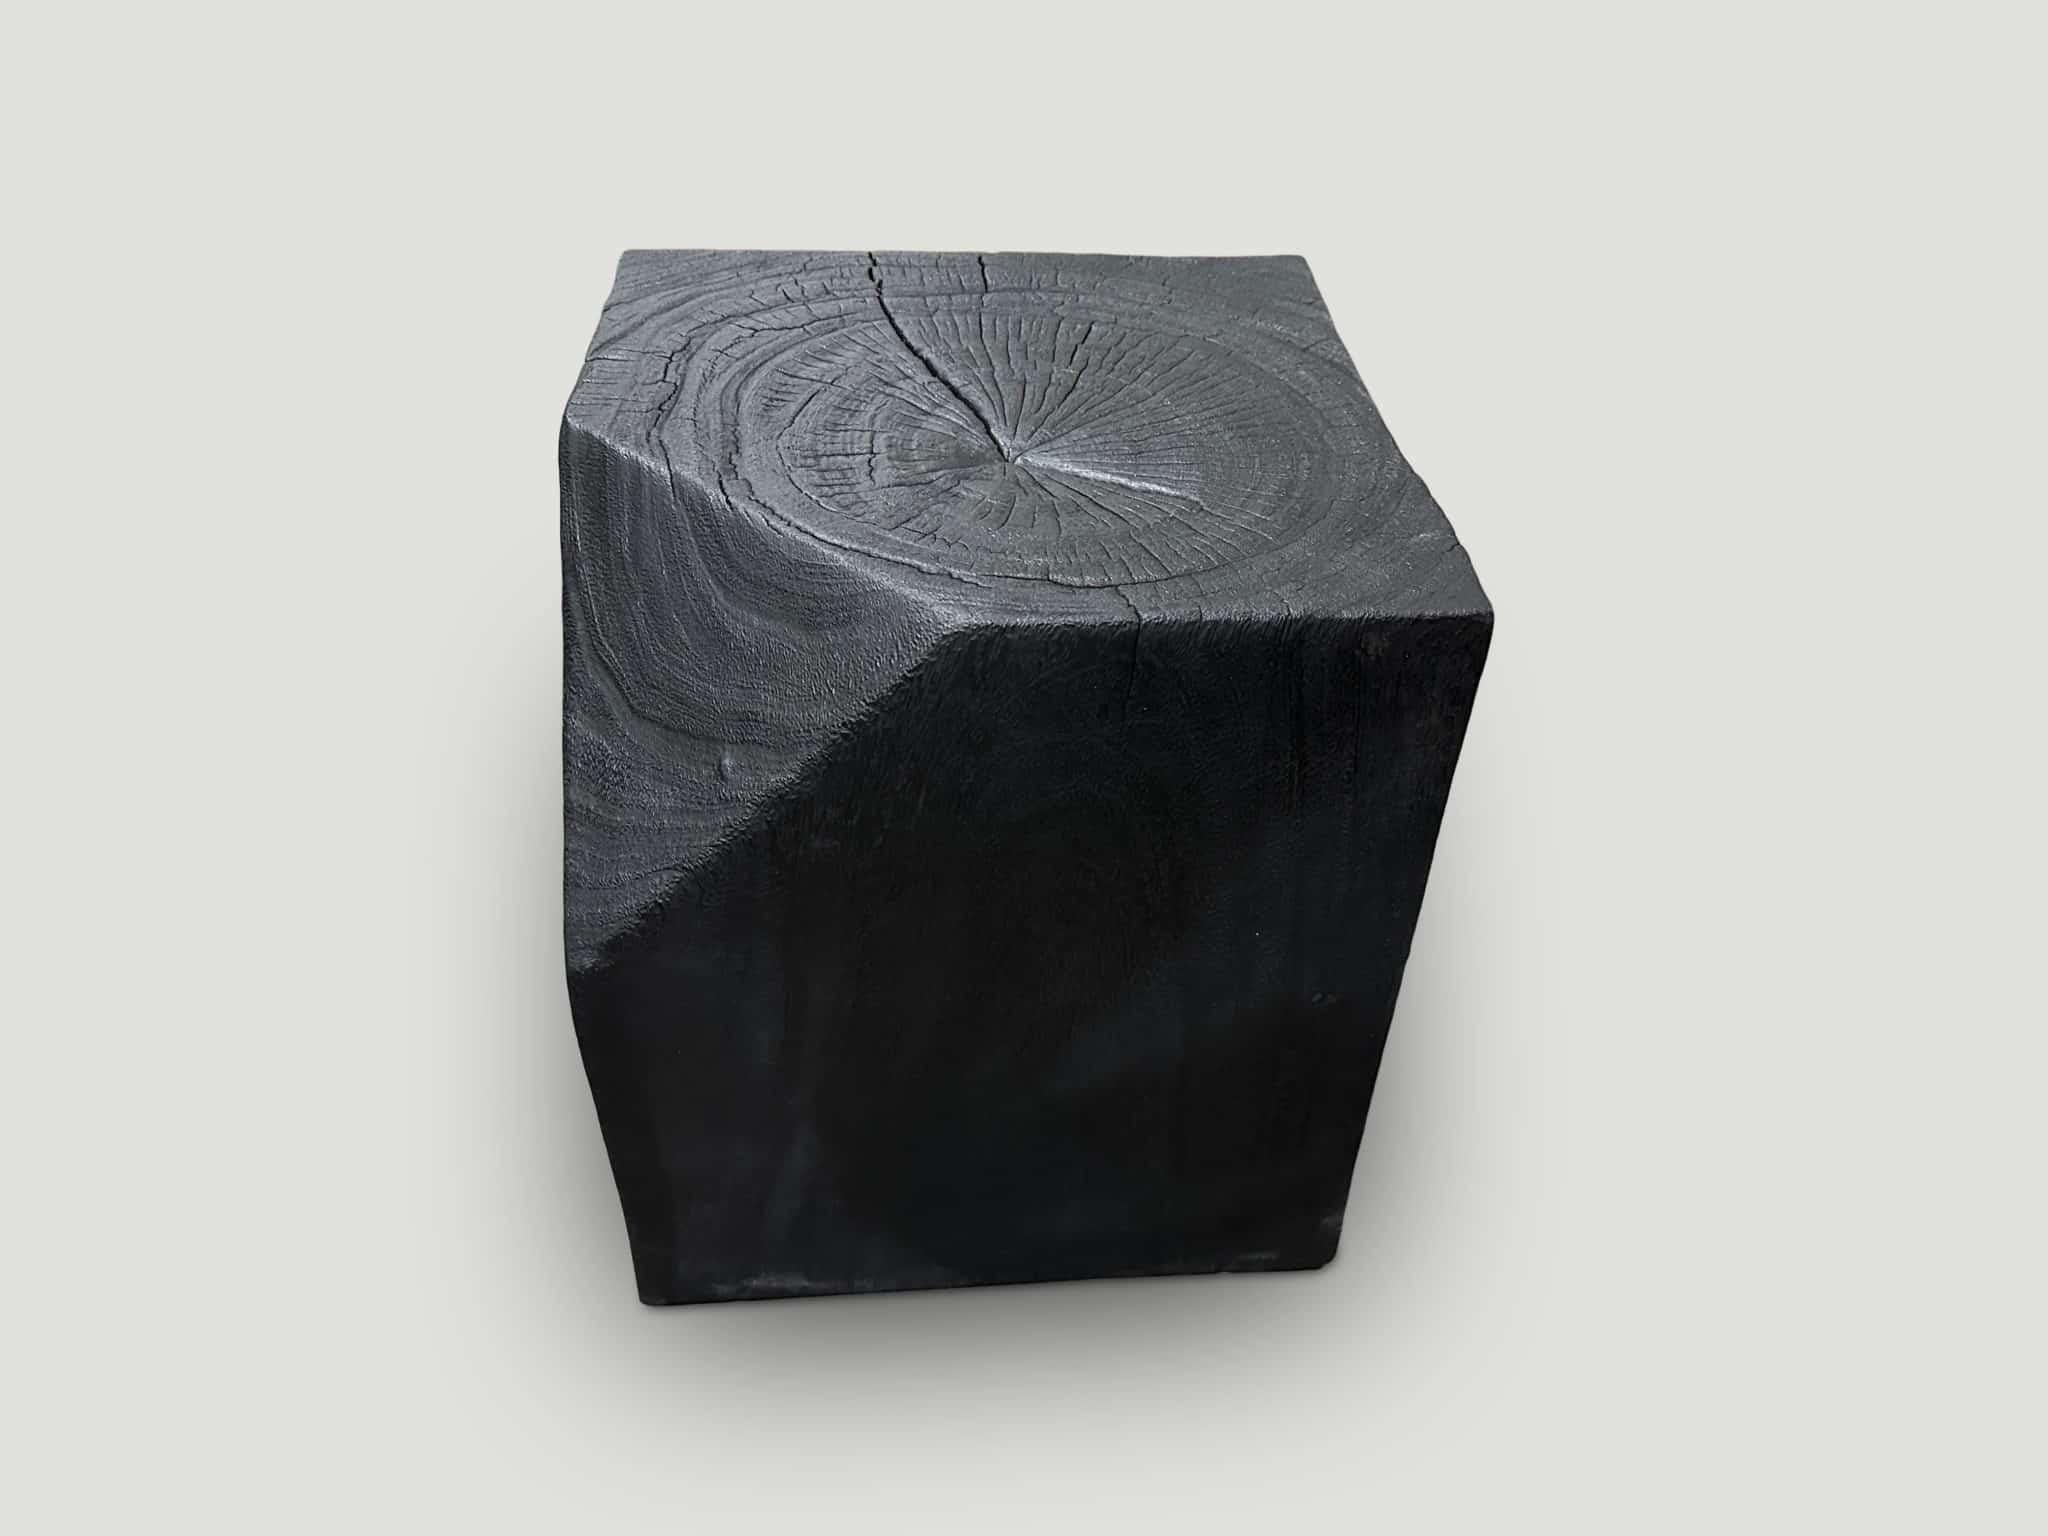 Modular faceted reclaimed suar wood side table. Charred, sanded and sealed revealing the beautiful wood grain. We have a collection that can be placed together for different shapes and sizes. The price reflects the one shown.

The Triple Burnt